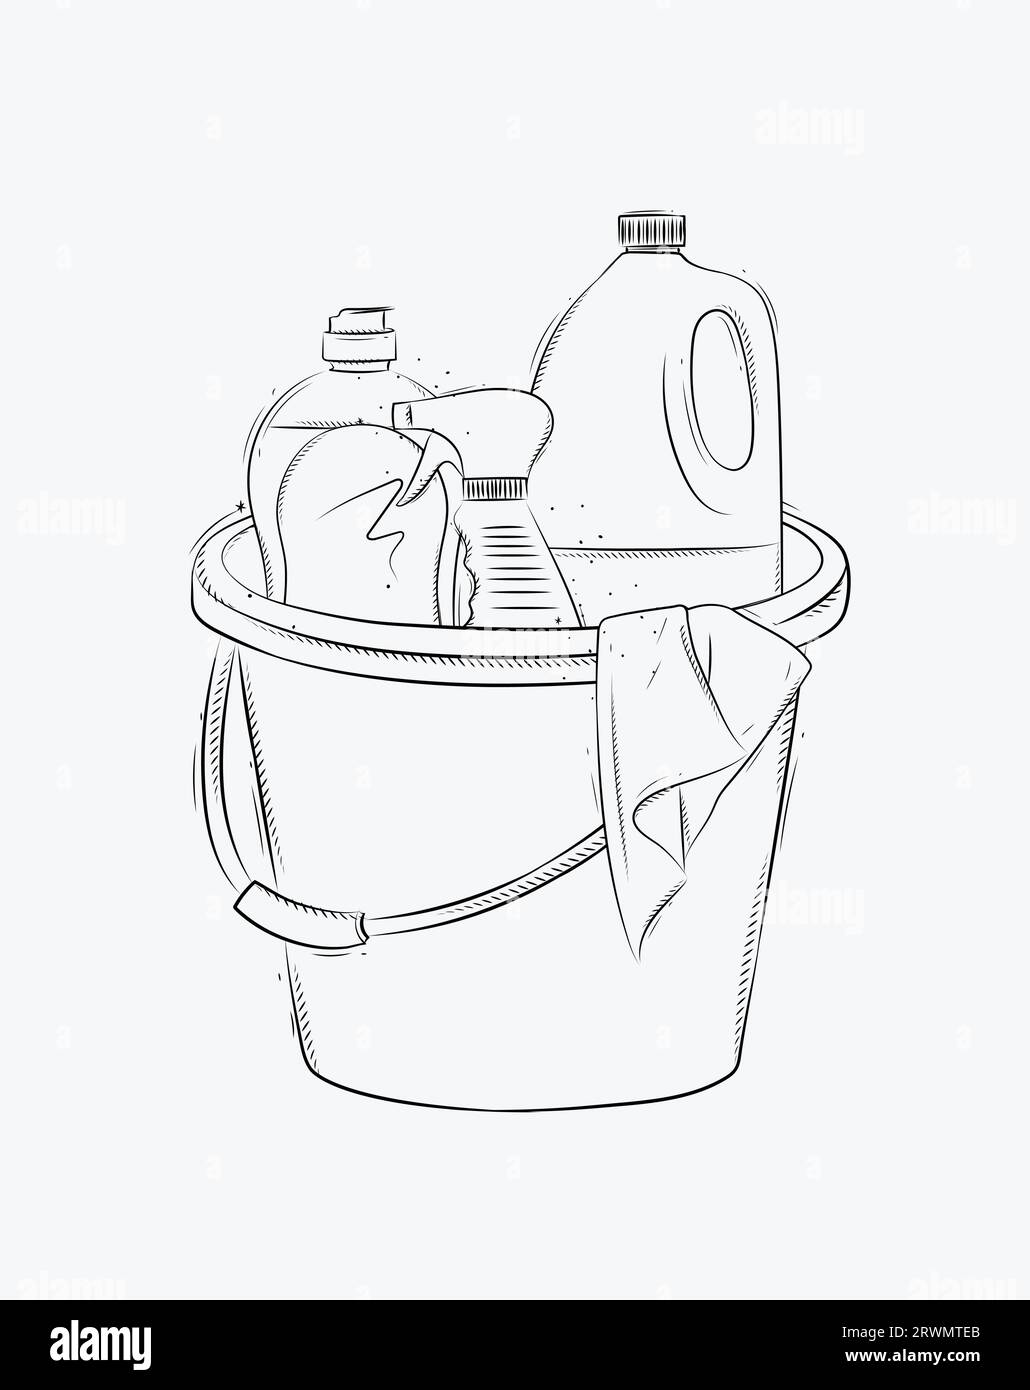 Cleaning supplies tools accessories bucket, rag, glass cleaner drawing in graphic style on white background Stock Vector